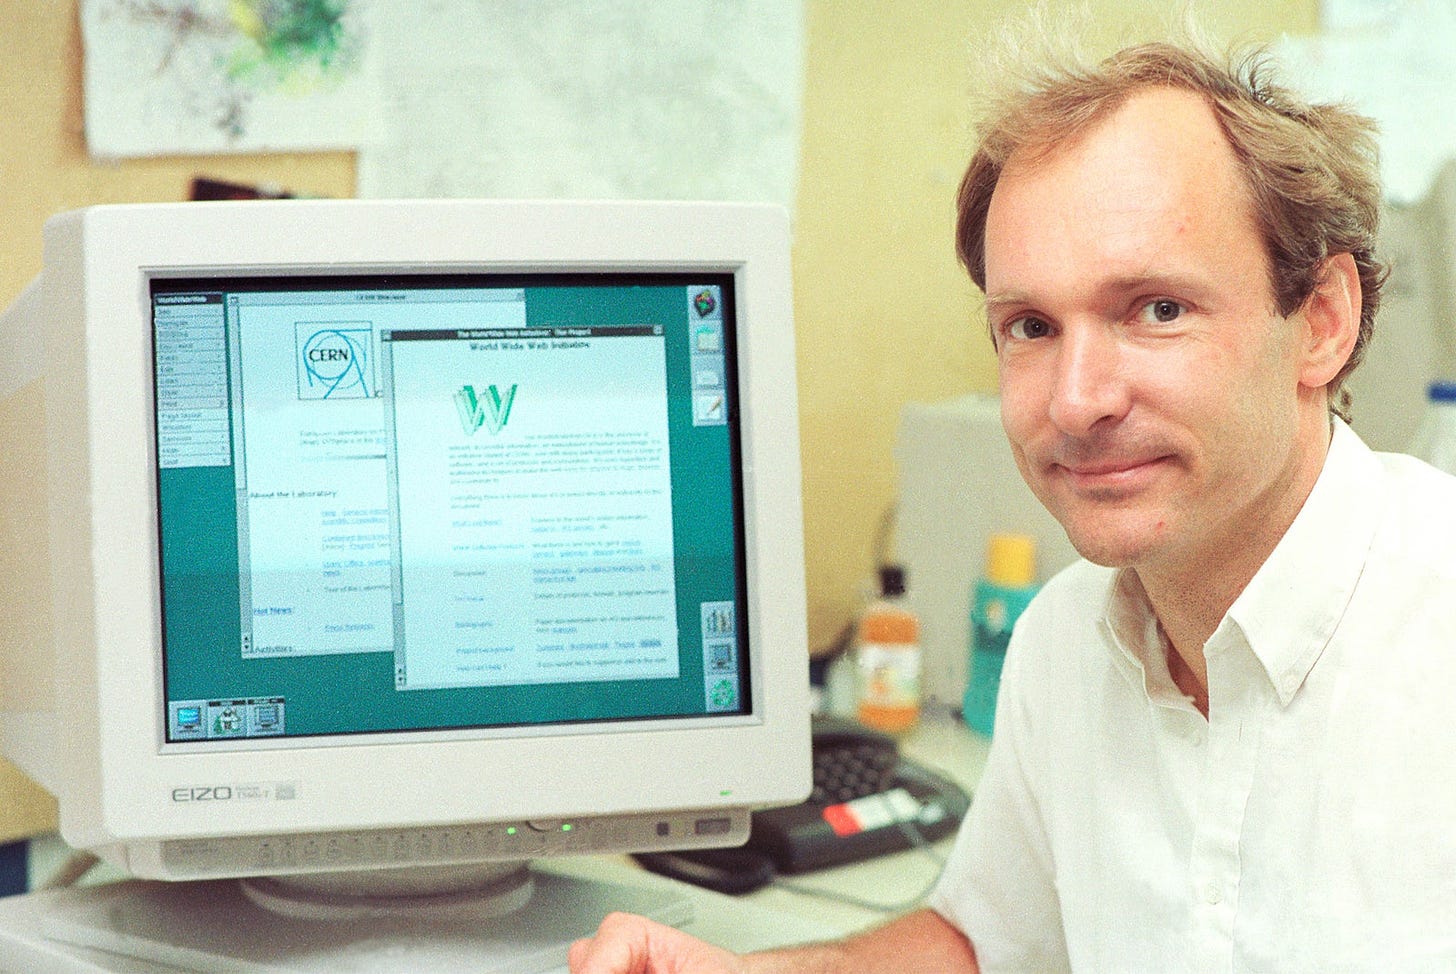 I Was Devastated”: Tim Berners-Lee, the Man Who Created the World Wide Web,  Has Some Regrets | Vanity Fair